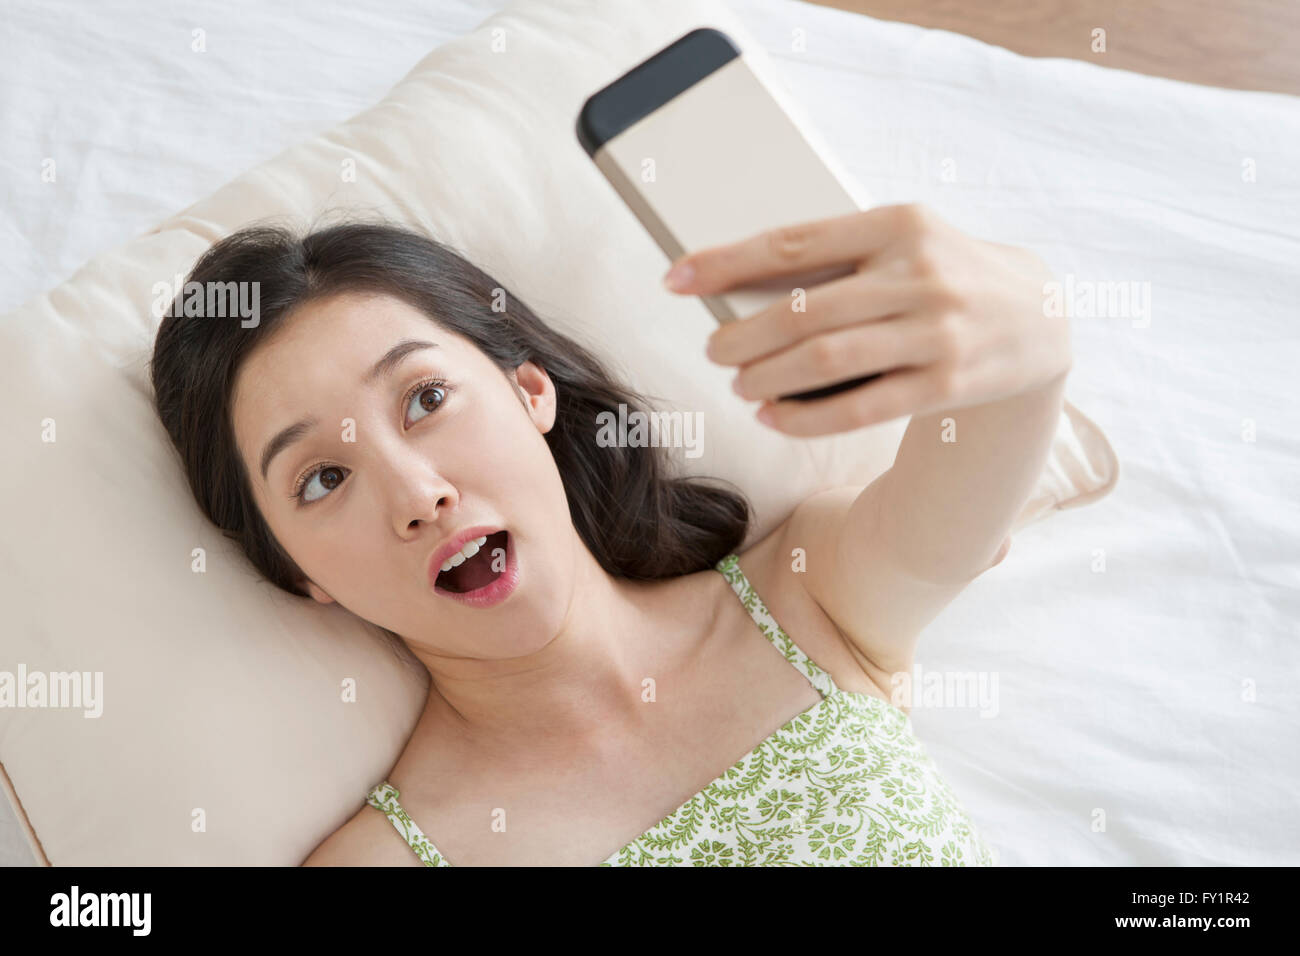 Portrait of young smiling woman lying down on bed taking picture of herself looking up Stock Photo